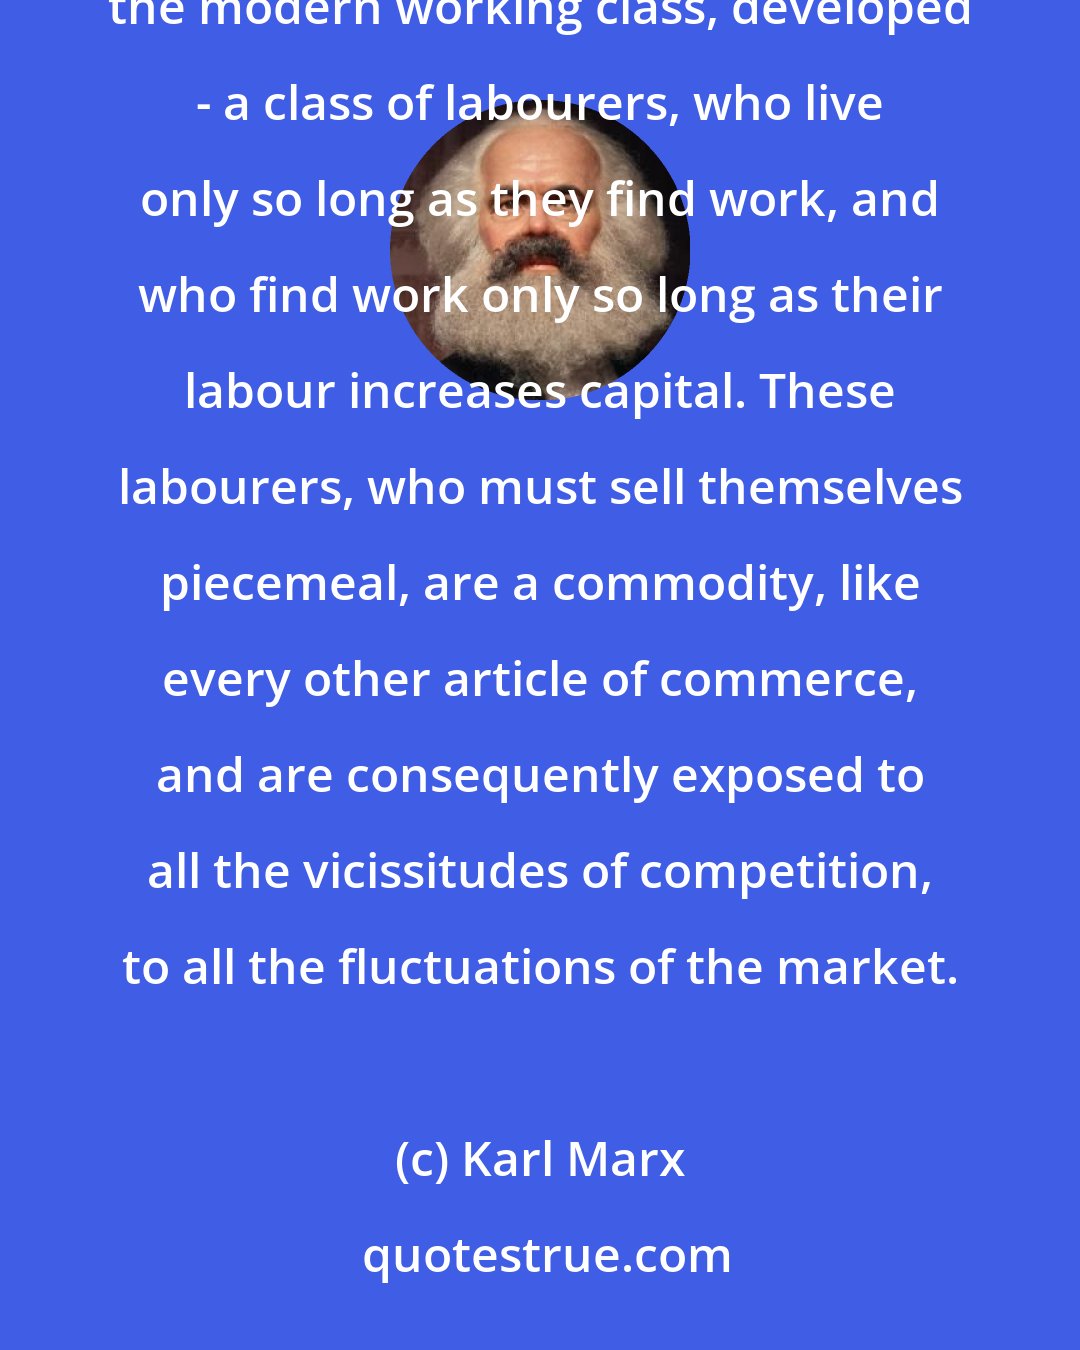 Karl Marx: In proportion as the bourgeoisie, i.e., capital, is developed, in the same proportion is the proletariat, the modern working class, developed - a class of labourers, who live only so long as they find work, and who find work only so long as their labour increases capital. These labourers, who must sell themselves piecemeal, are a commodity, like every other article of commerce, and are consequently exposed to all the vicissitudes of competition, to all the fluctuations of the market.